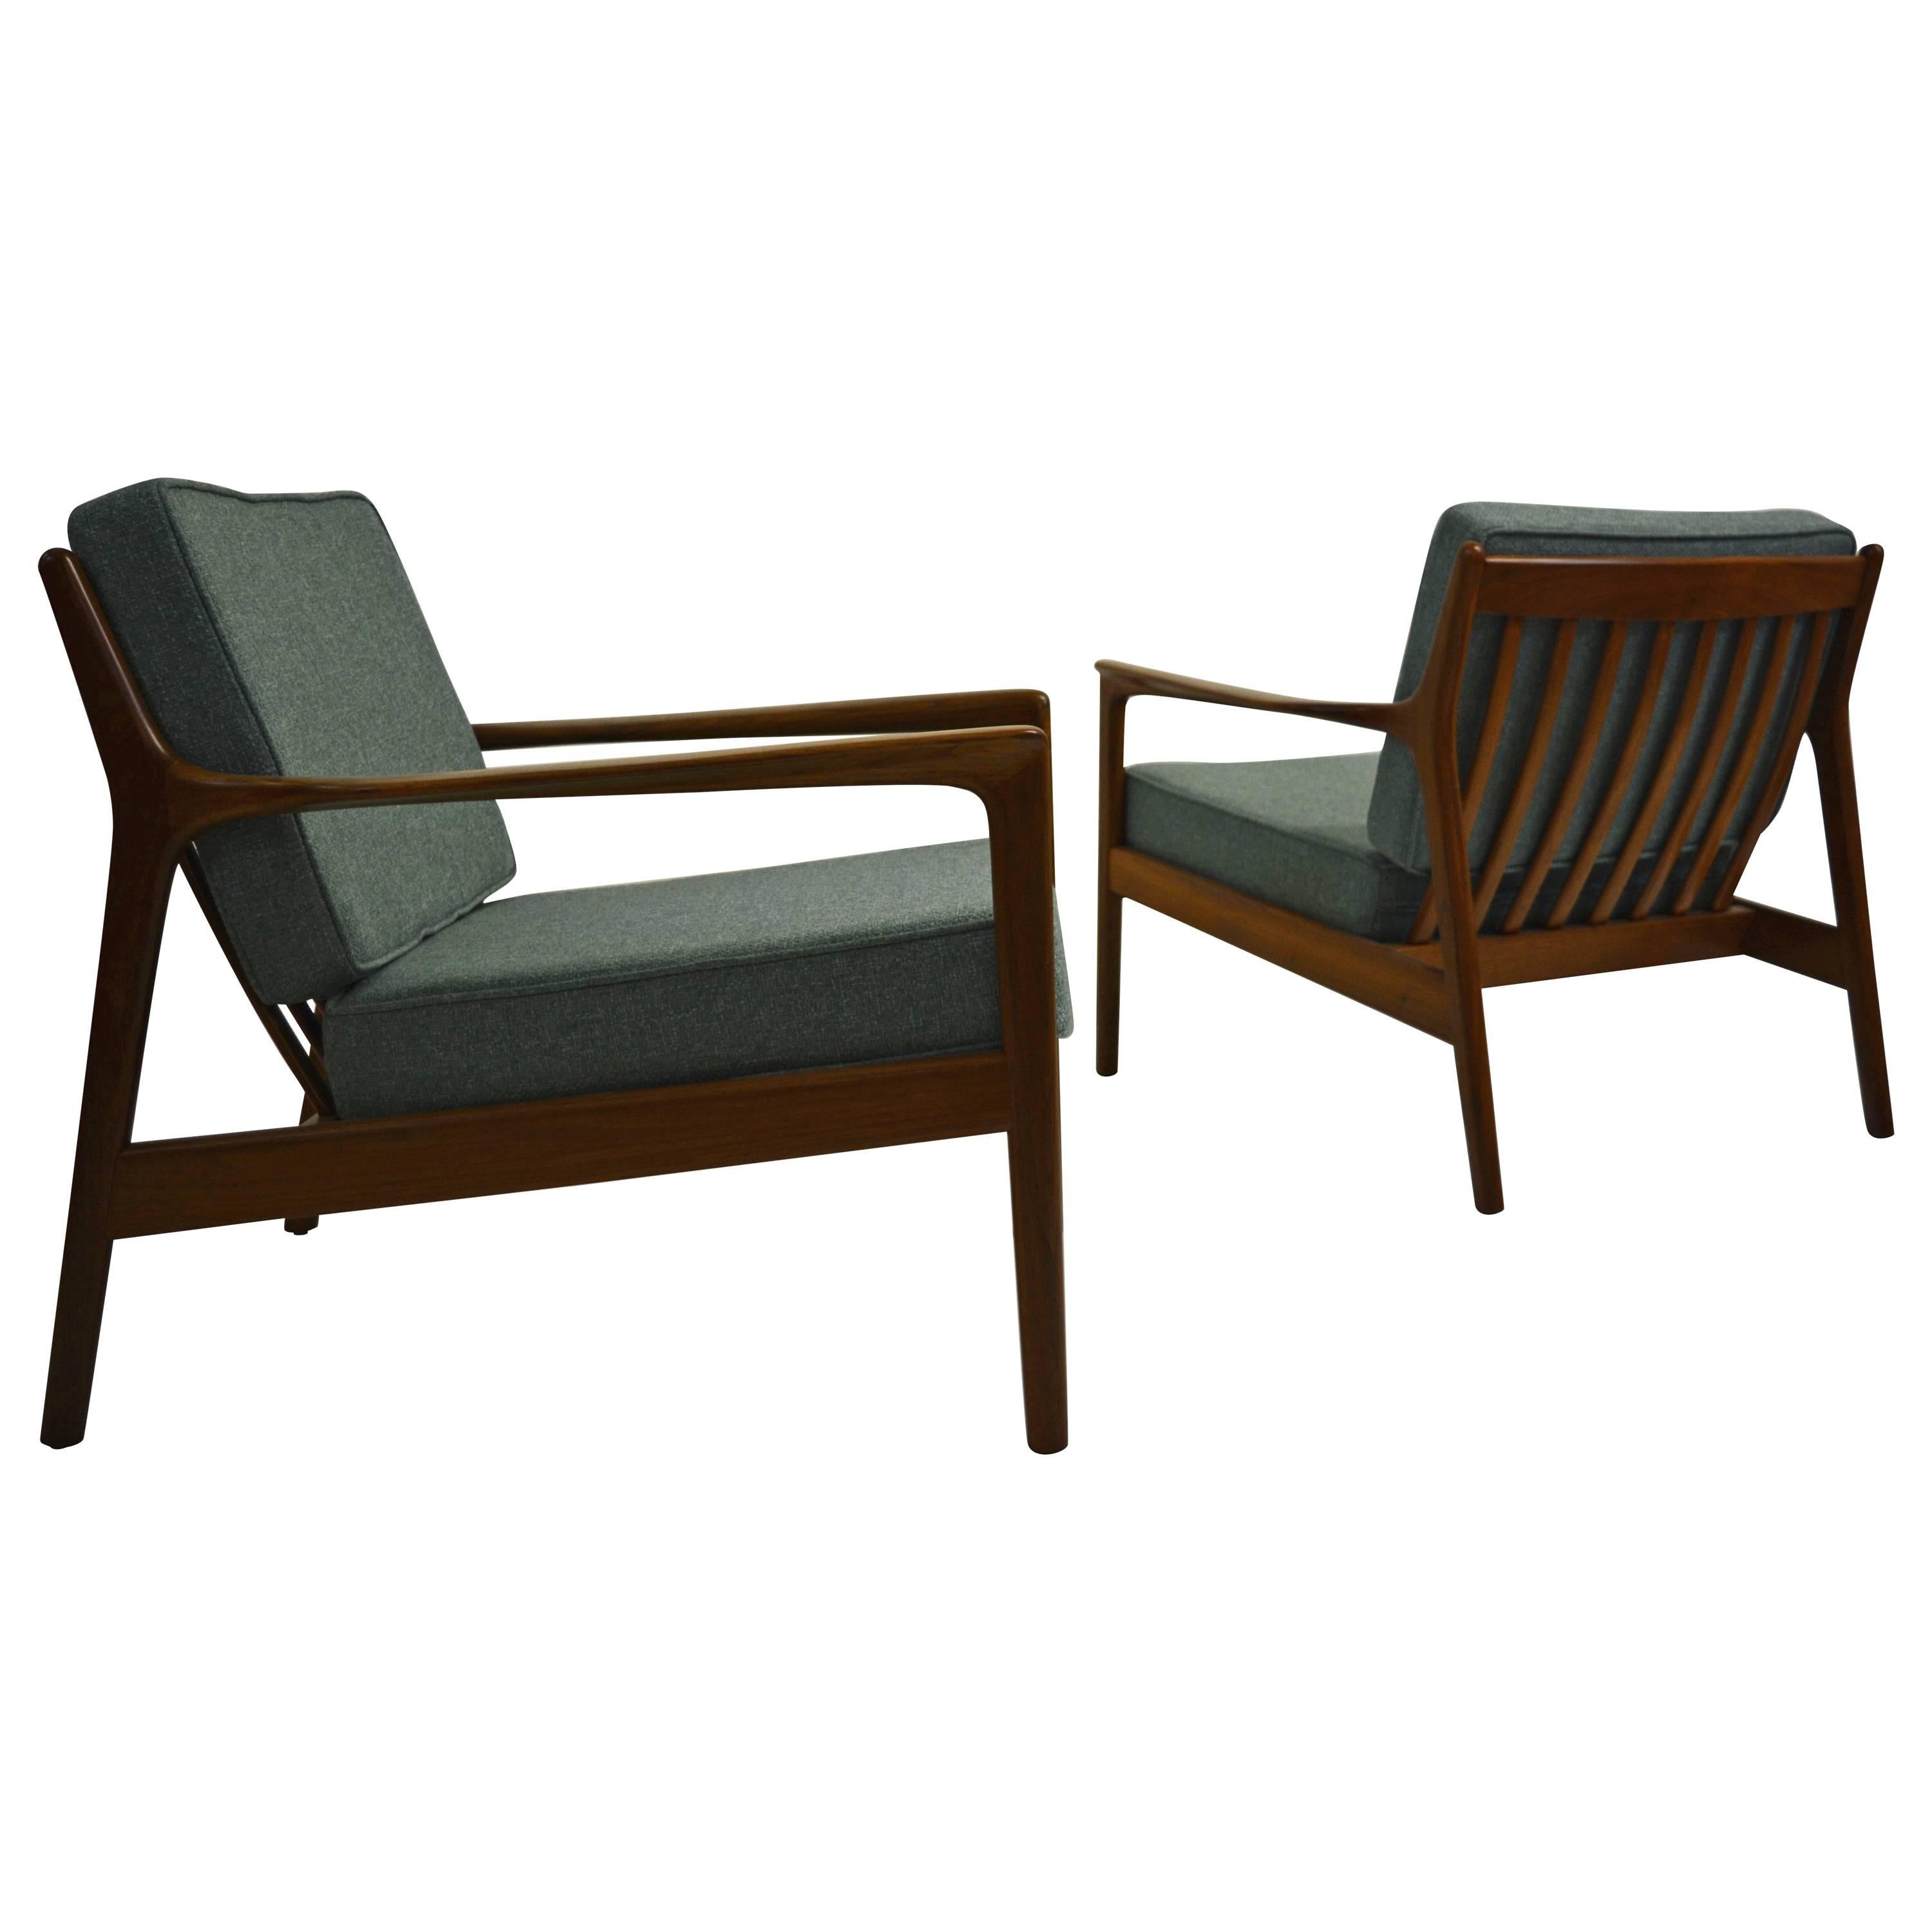 Pair of "USA 75" Lounge Chairs by Folke Ohlsson for DUX For Sale